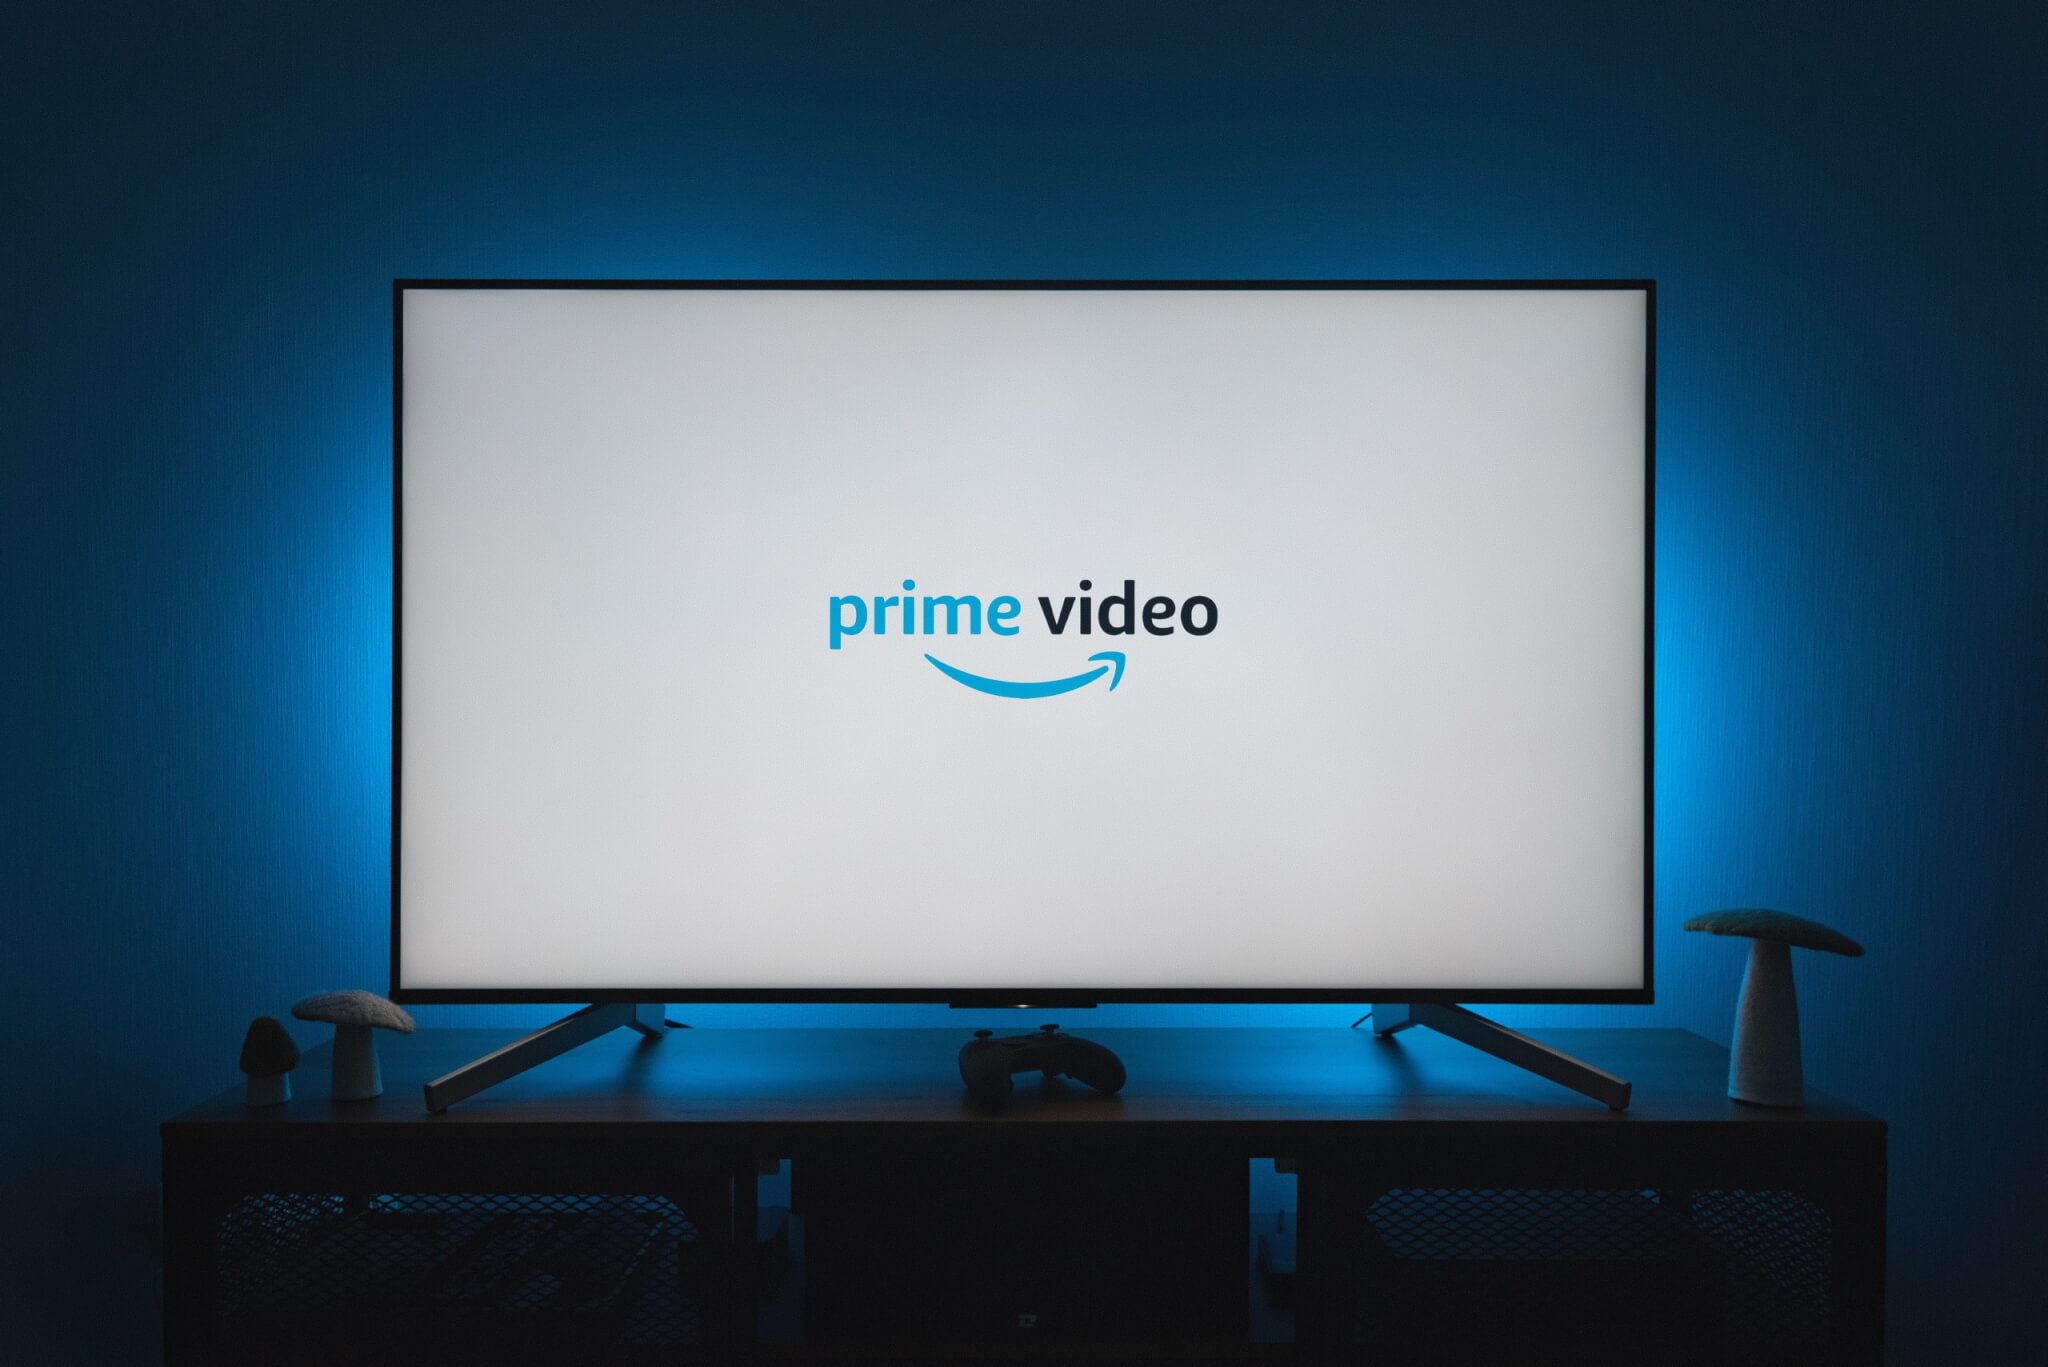 The Best Movies On Amazon Prime Video: Top 5 Films Most Recommended By Critics